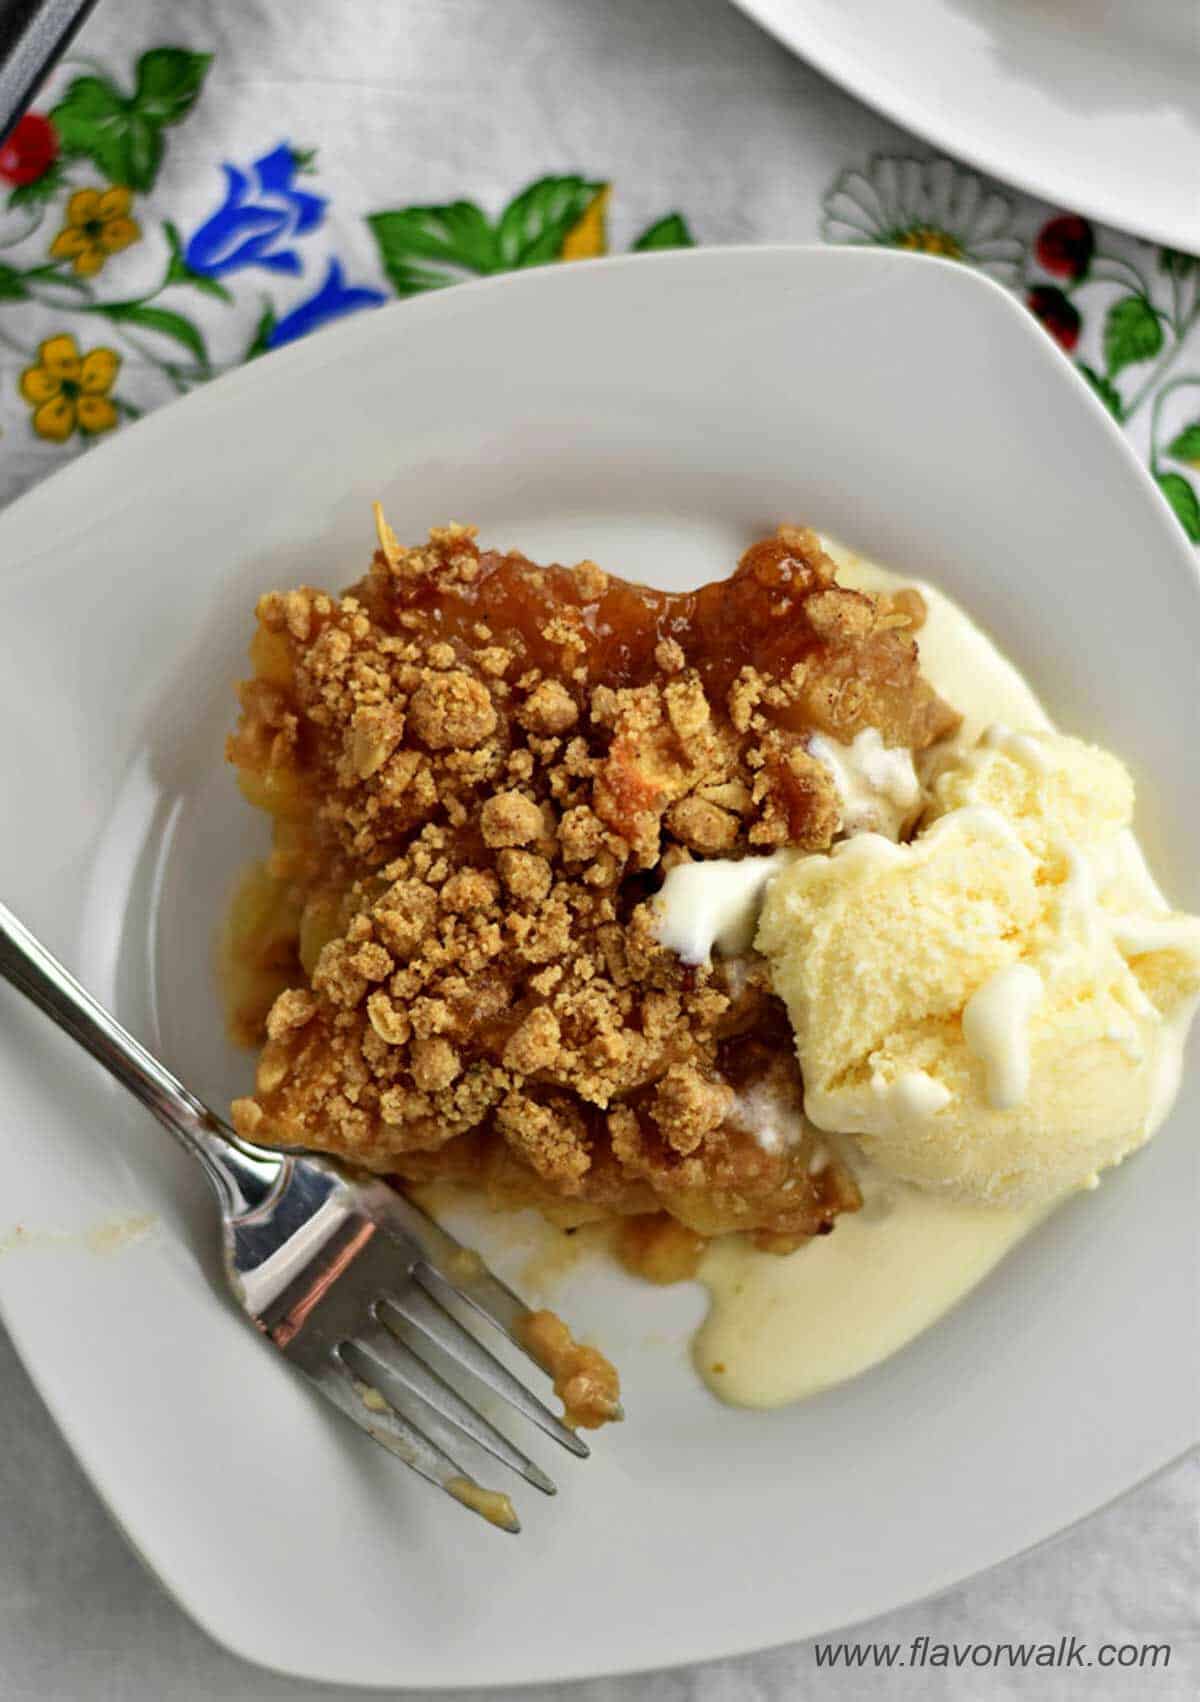 A slice of apple dessert with a scoop of vanilla ice cream and a fork on a small white plate.